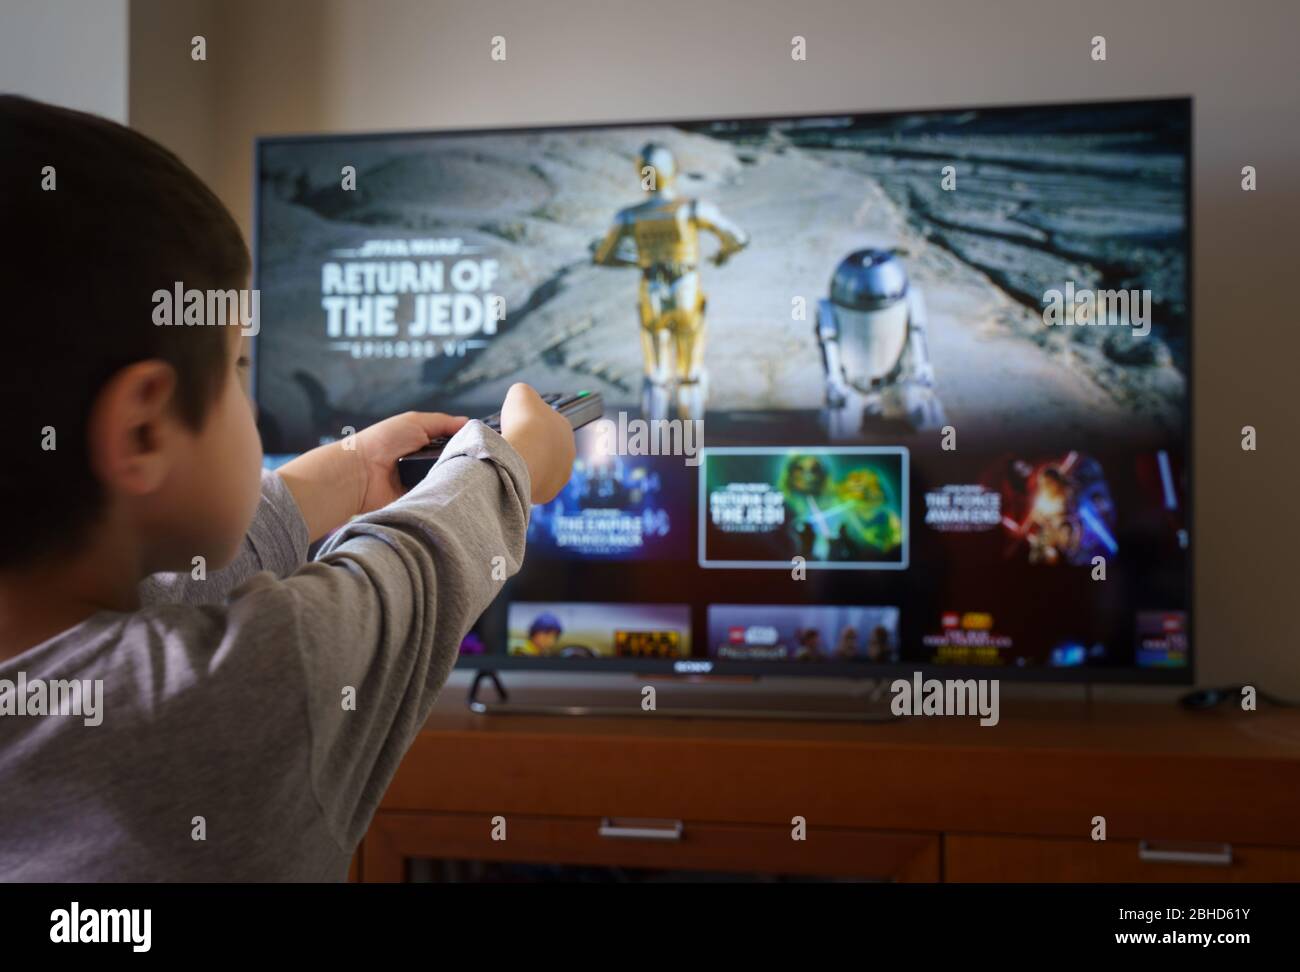 Barcelona, Spain. April 2020: Back view image of cute little boy watching Star Wars series movie and pointing at the TV screen. Stock Photo